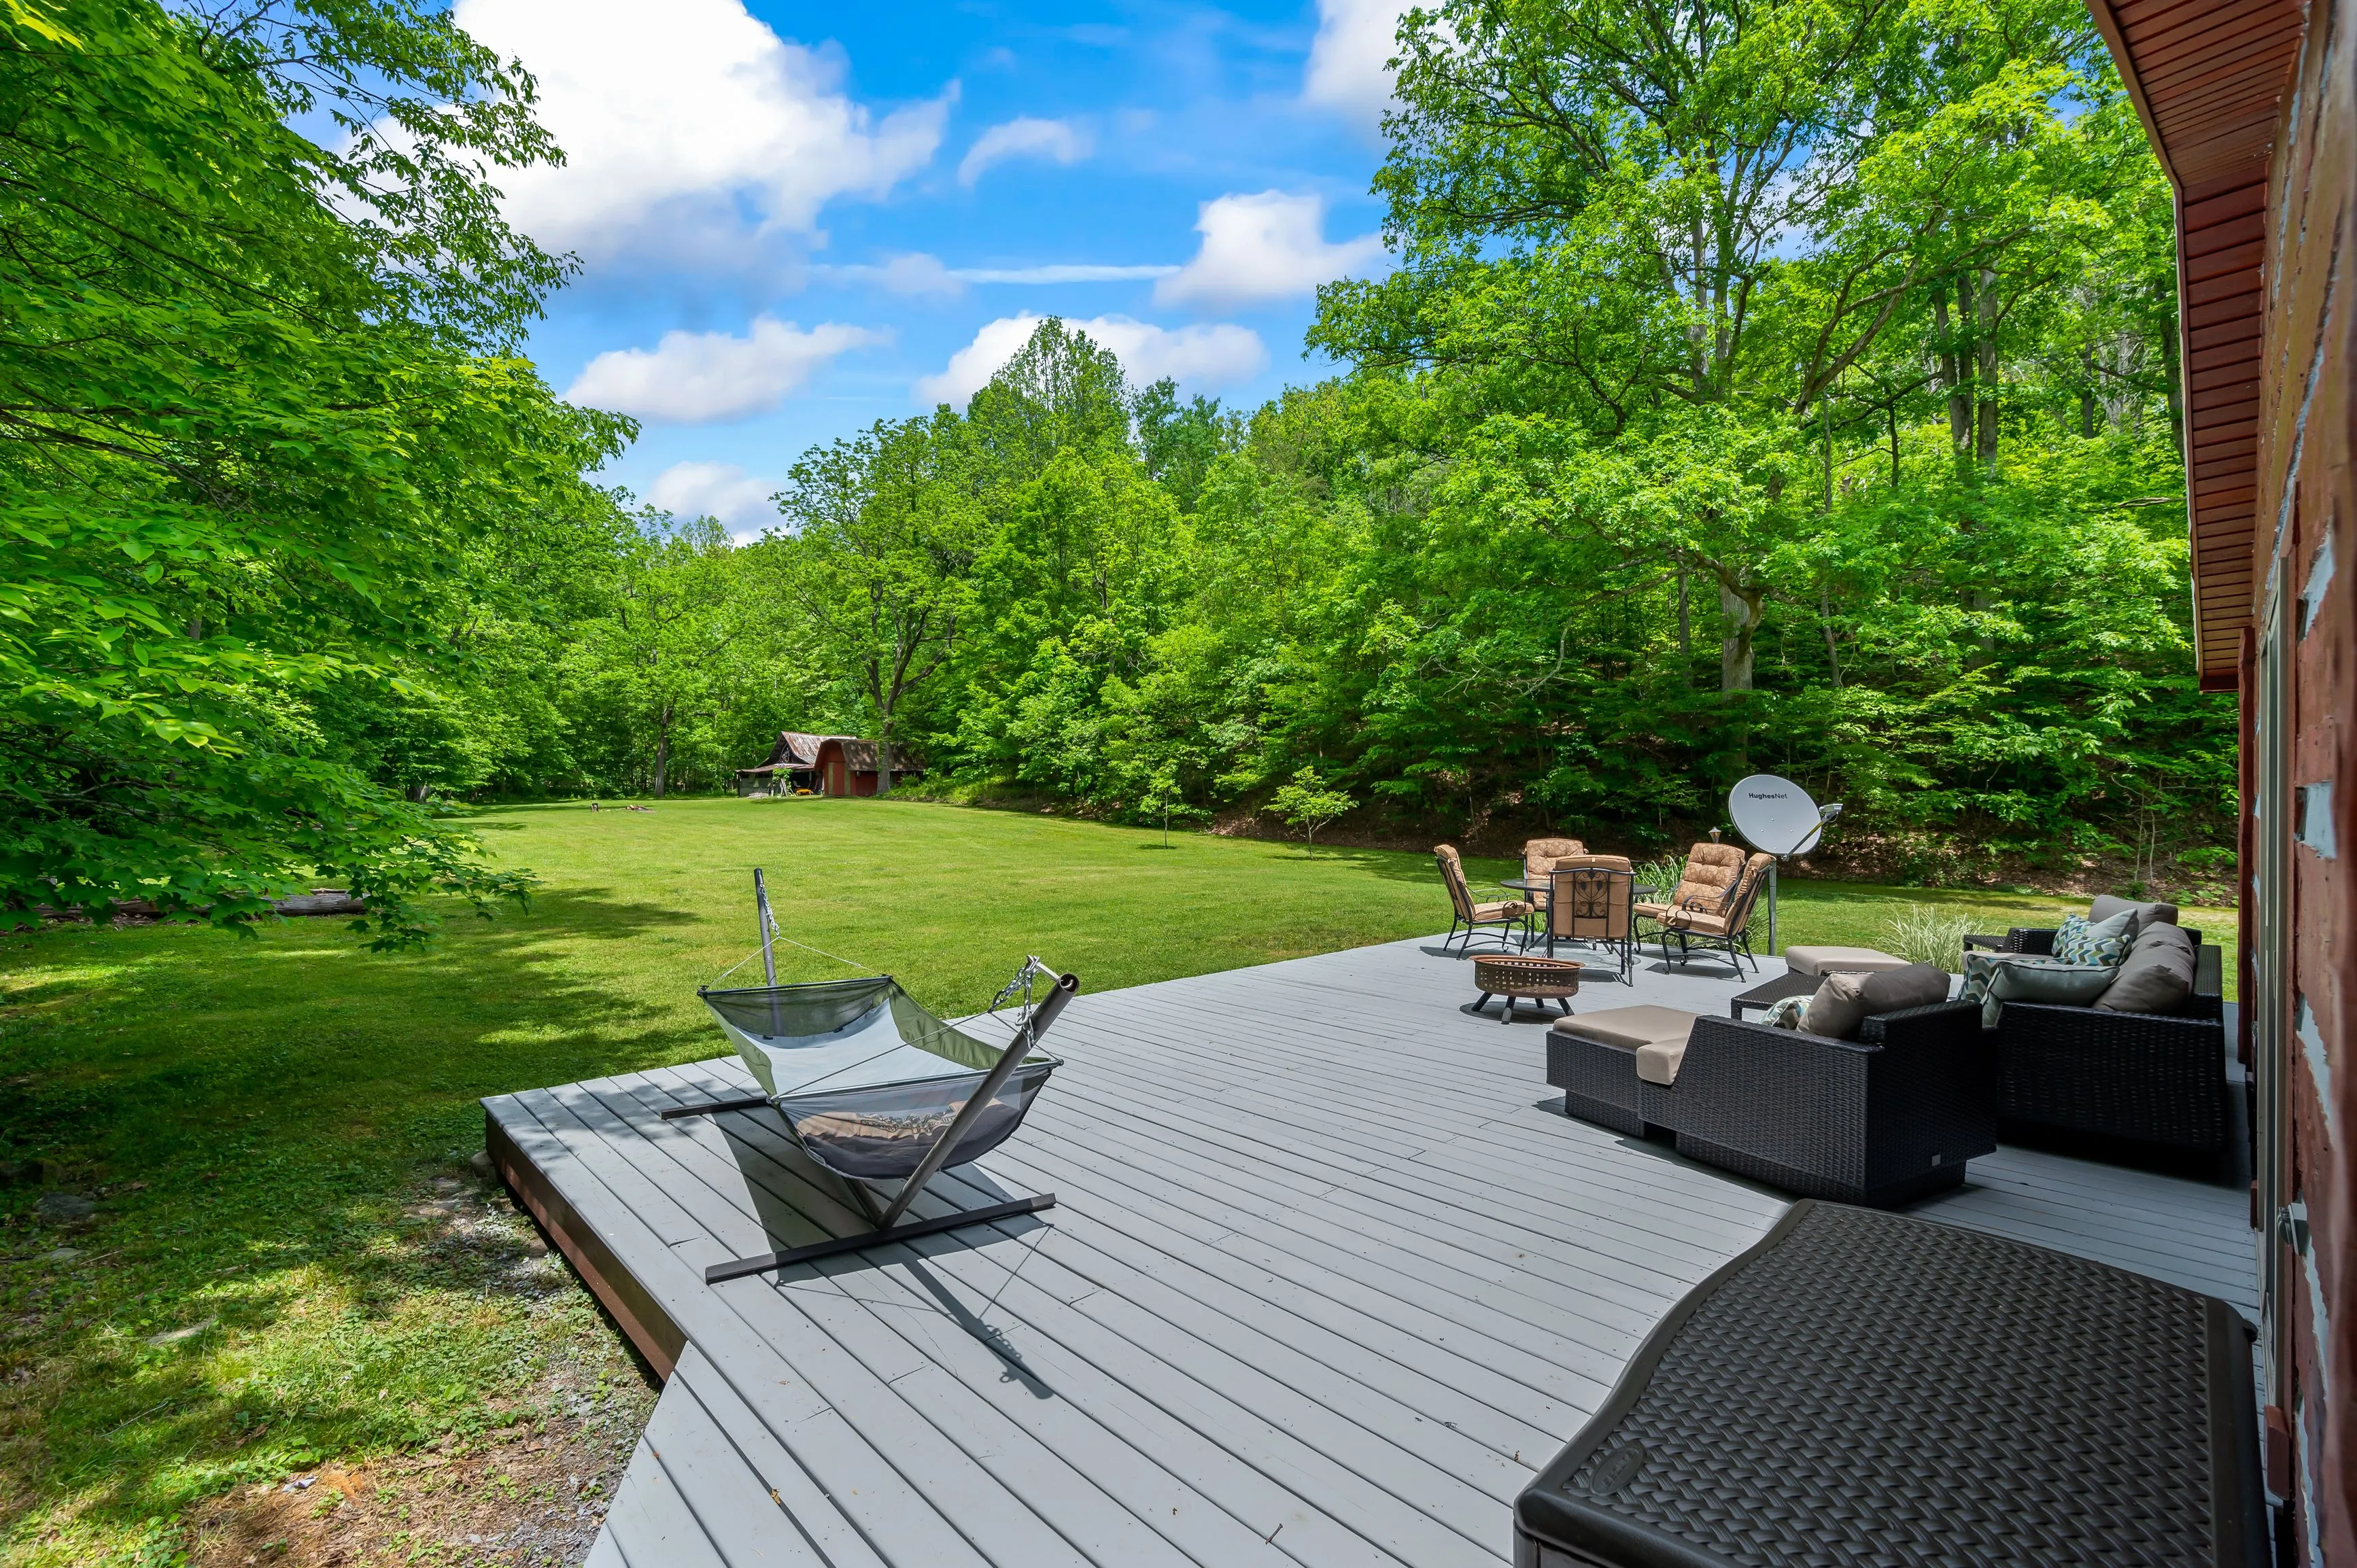 A spacious backyard with a large deck featuring outdoor furniture and a hammock, surrounded by lush green trees under a clear blue sky.